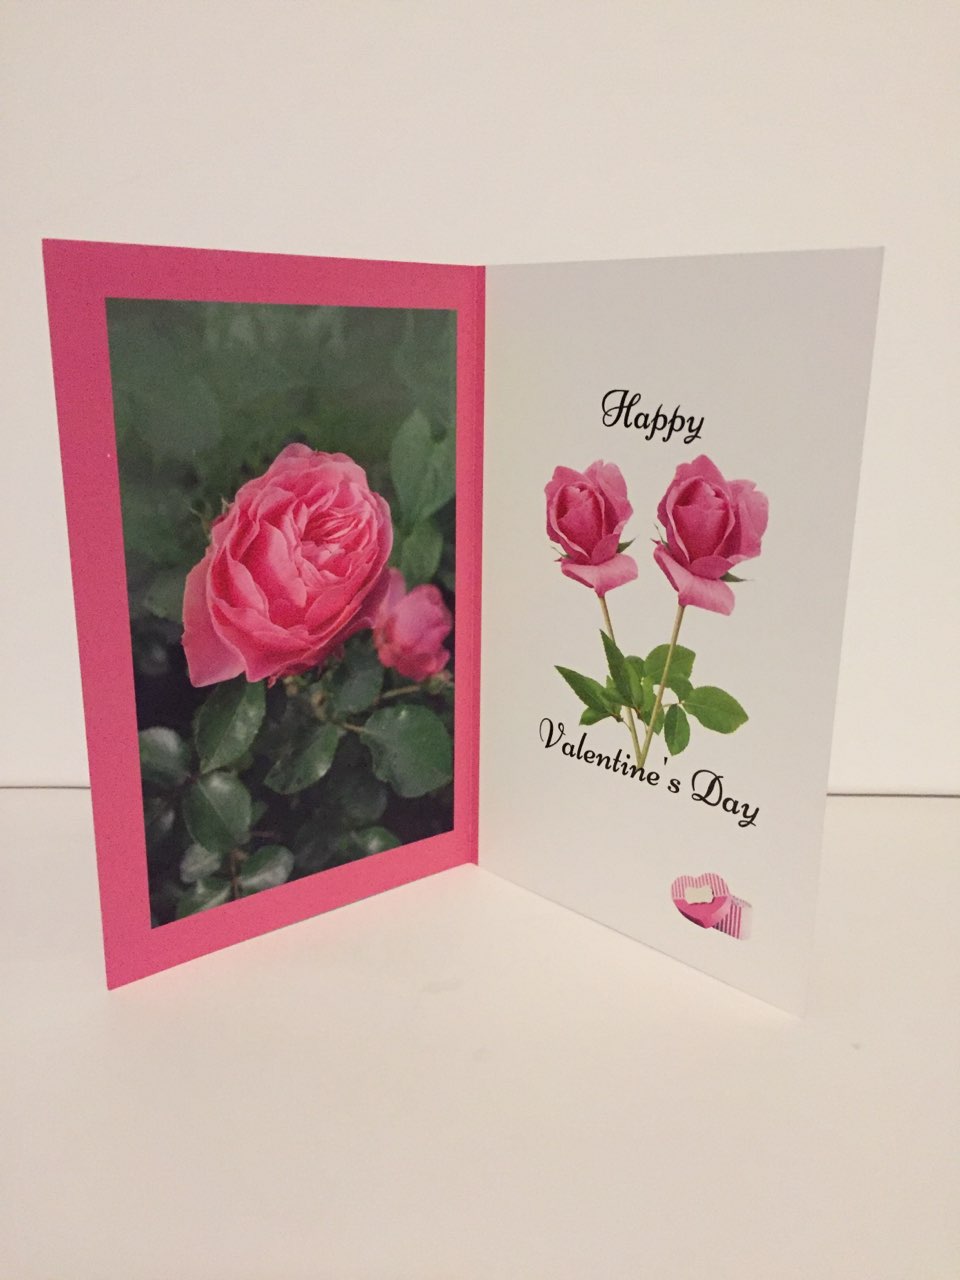 Our Love Grows Stronger 5.5 x 8.5 Valentine's Day Card